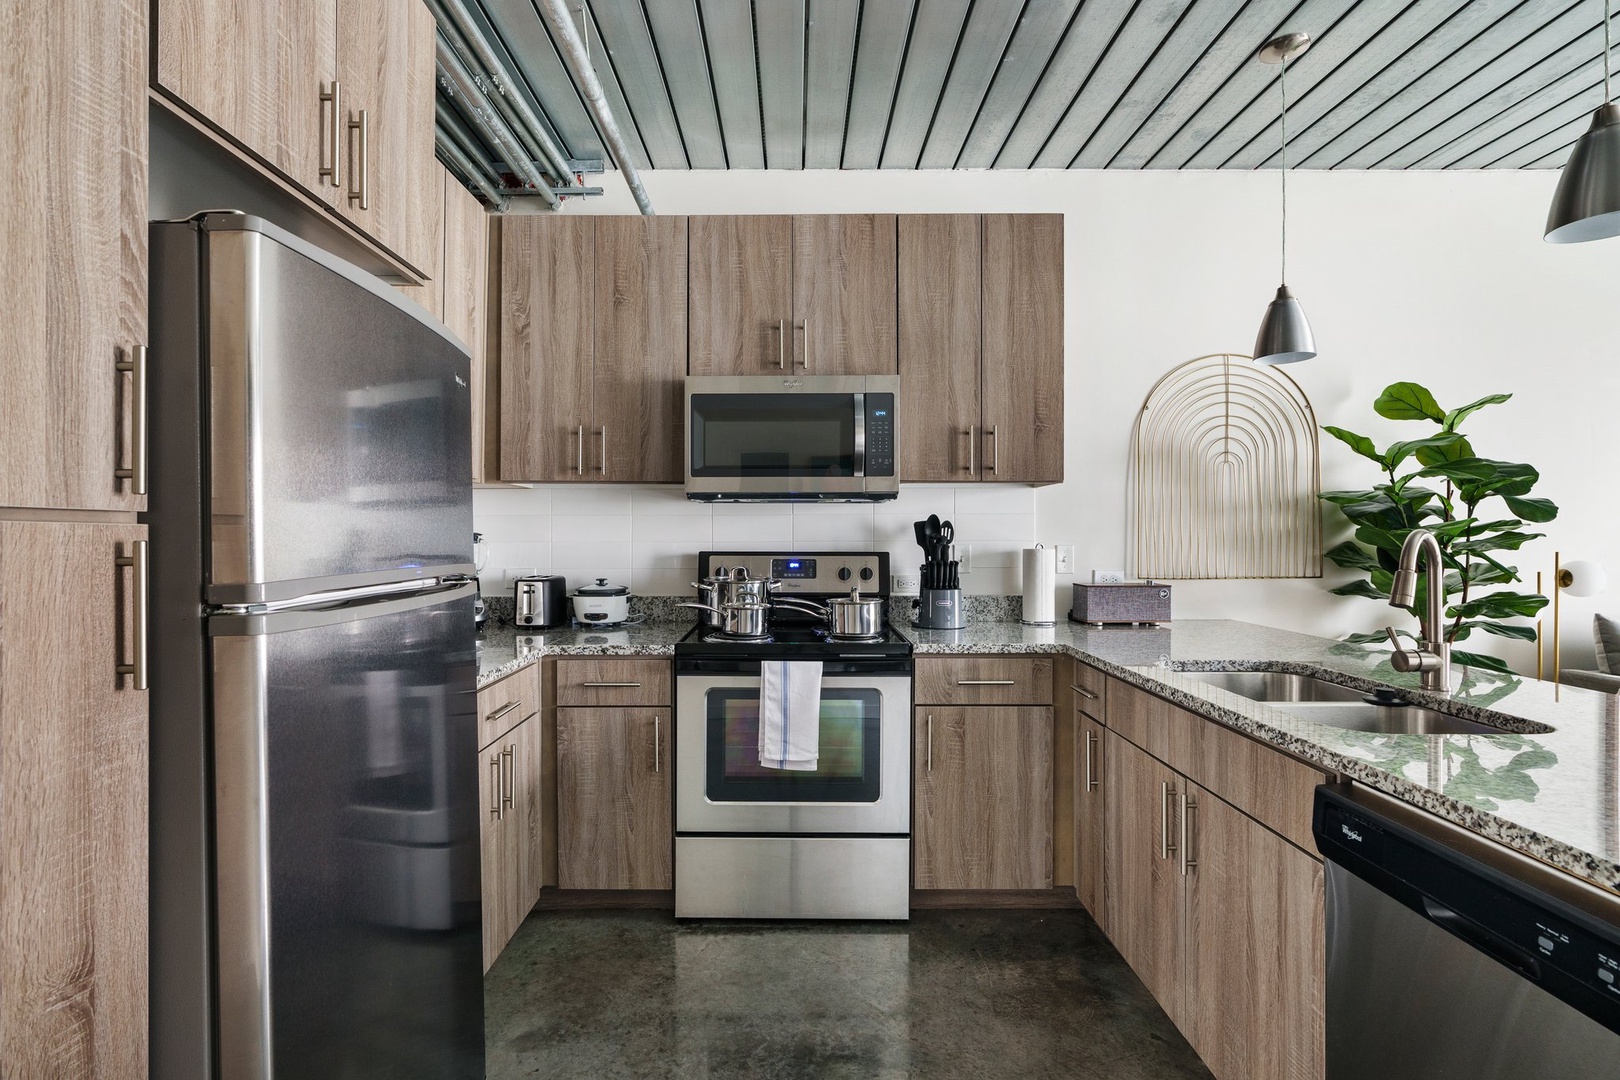 Prepare delicious meals in this modern kitchen with all the essentials.